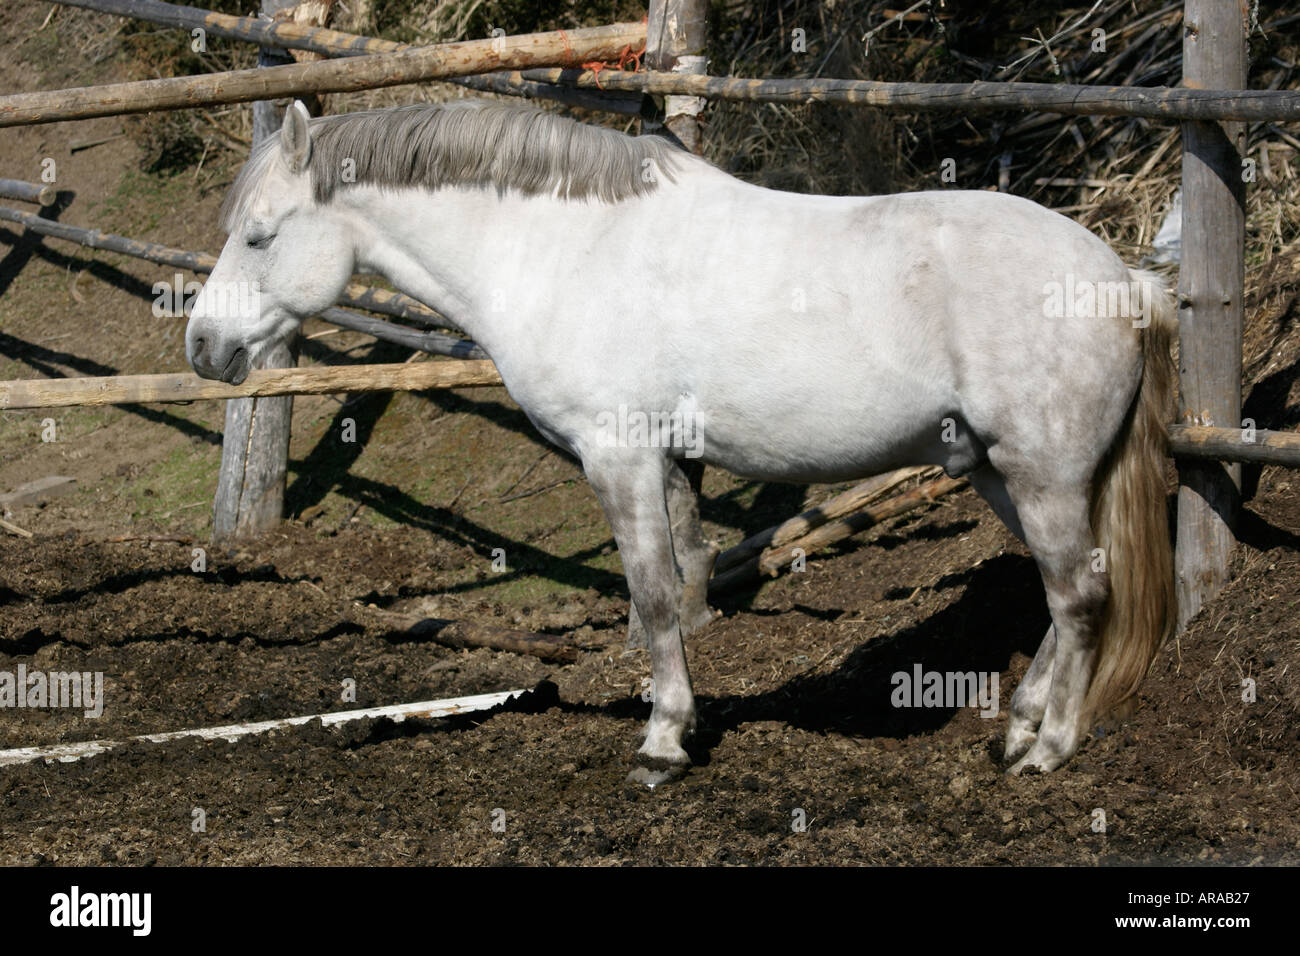 Sleeping Horse High Resolution Stock Photography And Images Alamy,How To Clean Porcelain Tile Shower